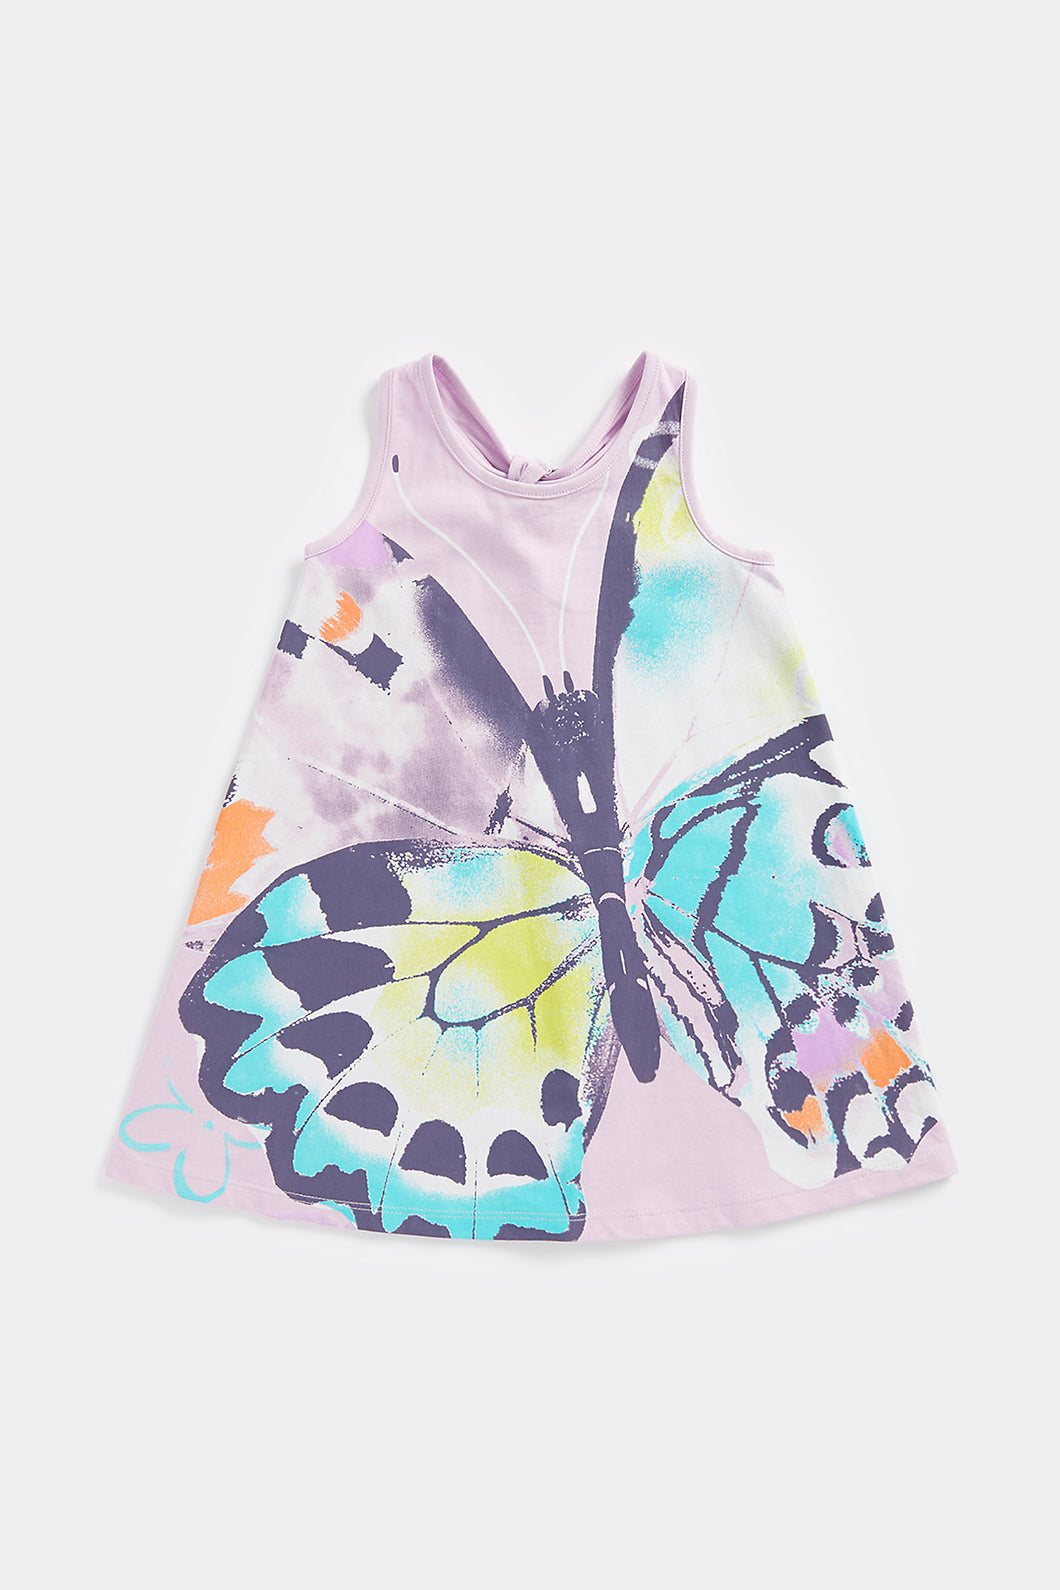 Mothercare Butterfly Dress